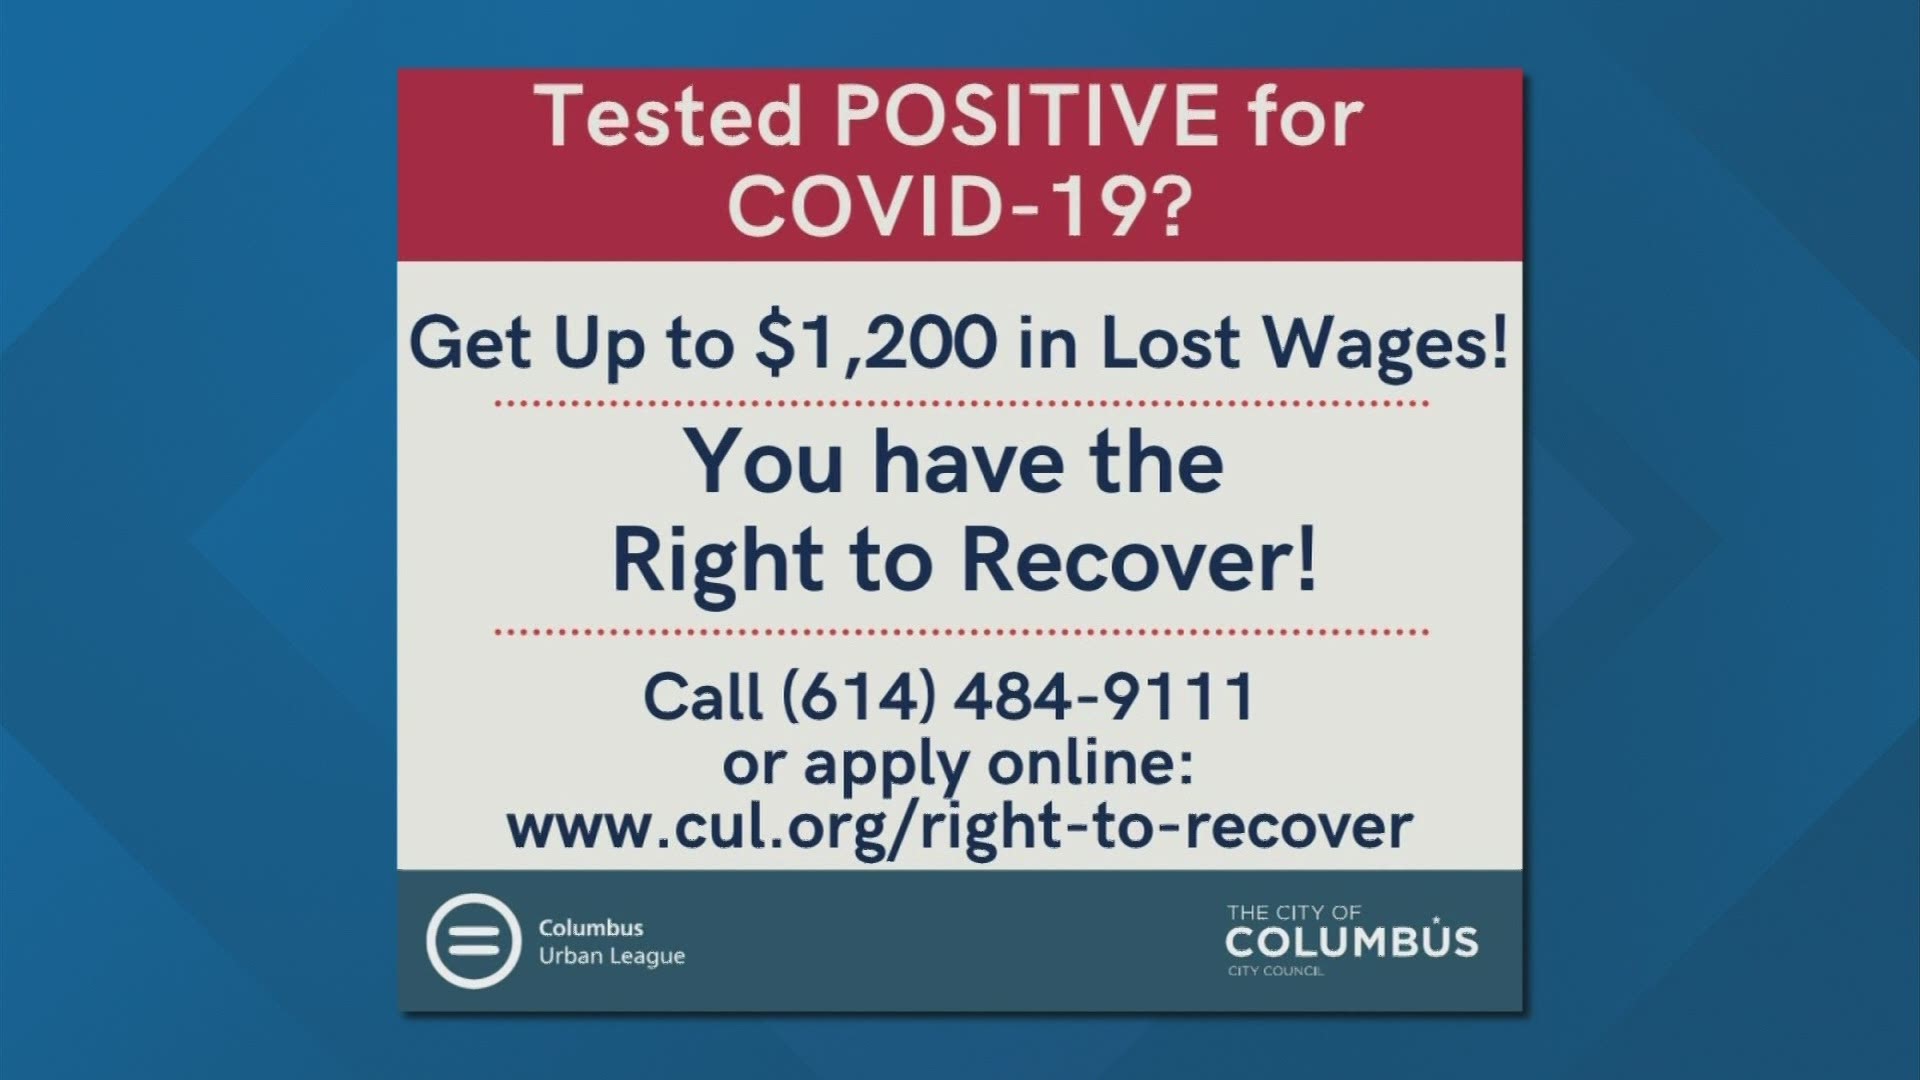 Qualified people can get up to $1,200 to cover the time off needed to isolate, recover or take care of their child recovering from COVID-19.